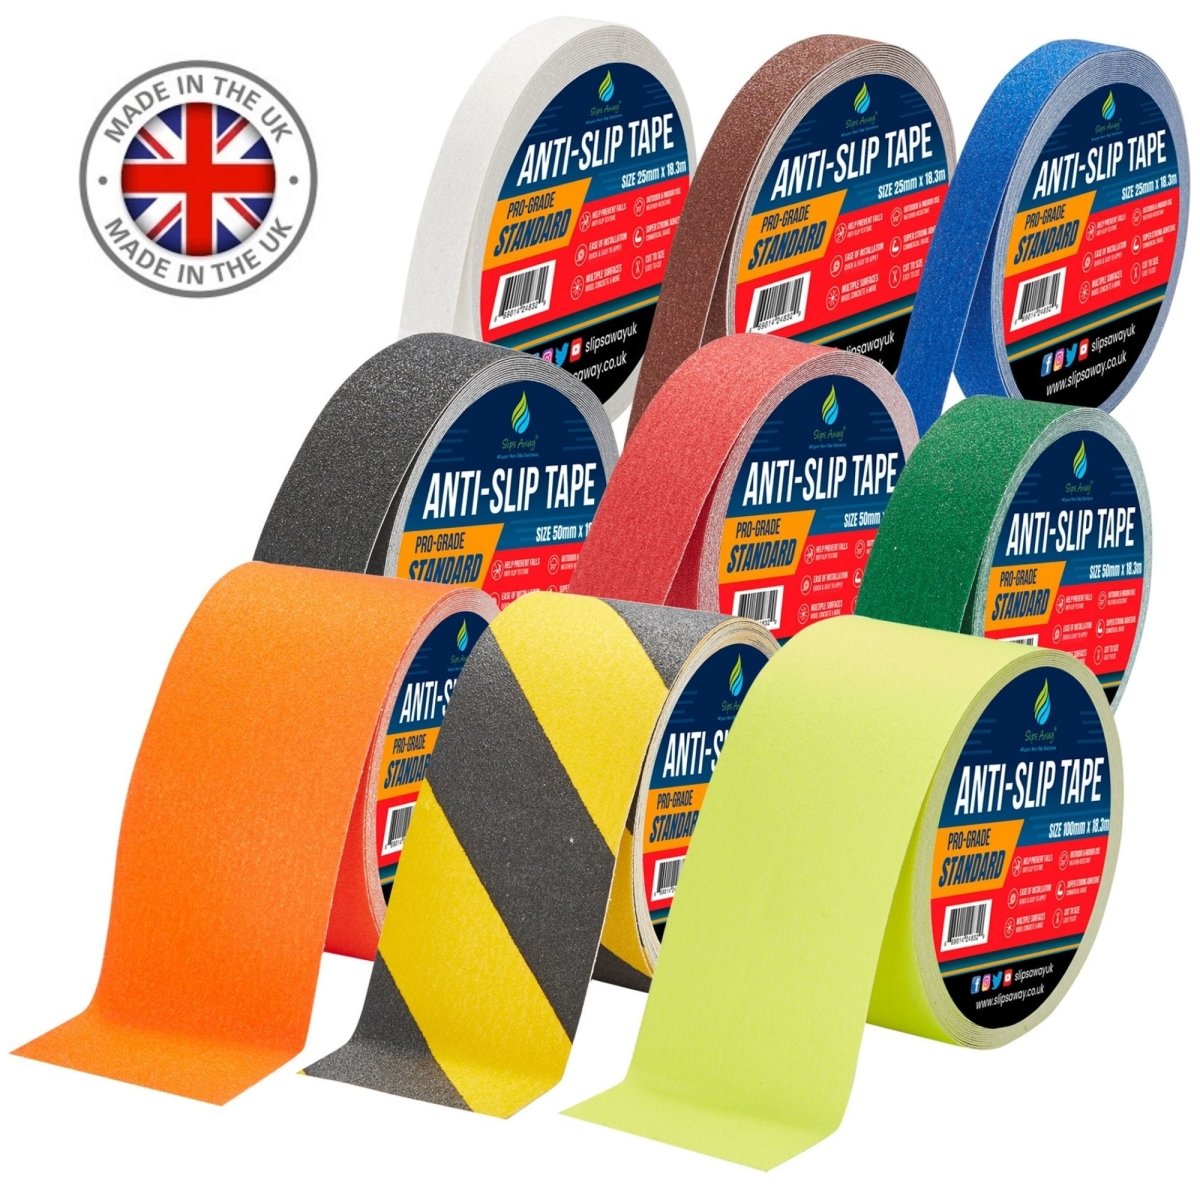 Profile image of all range Anti Slip Tape Rolls Standard Grade in all colours and sizes by Slips Away